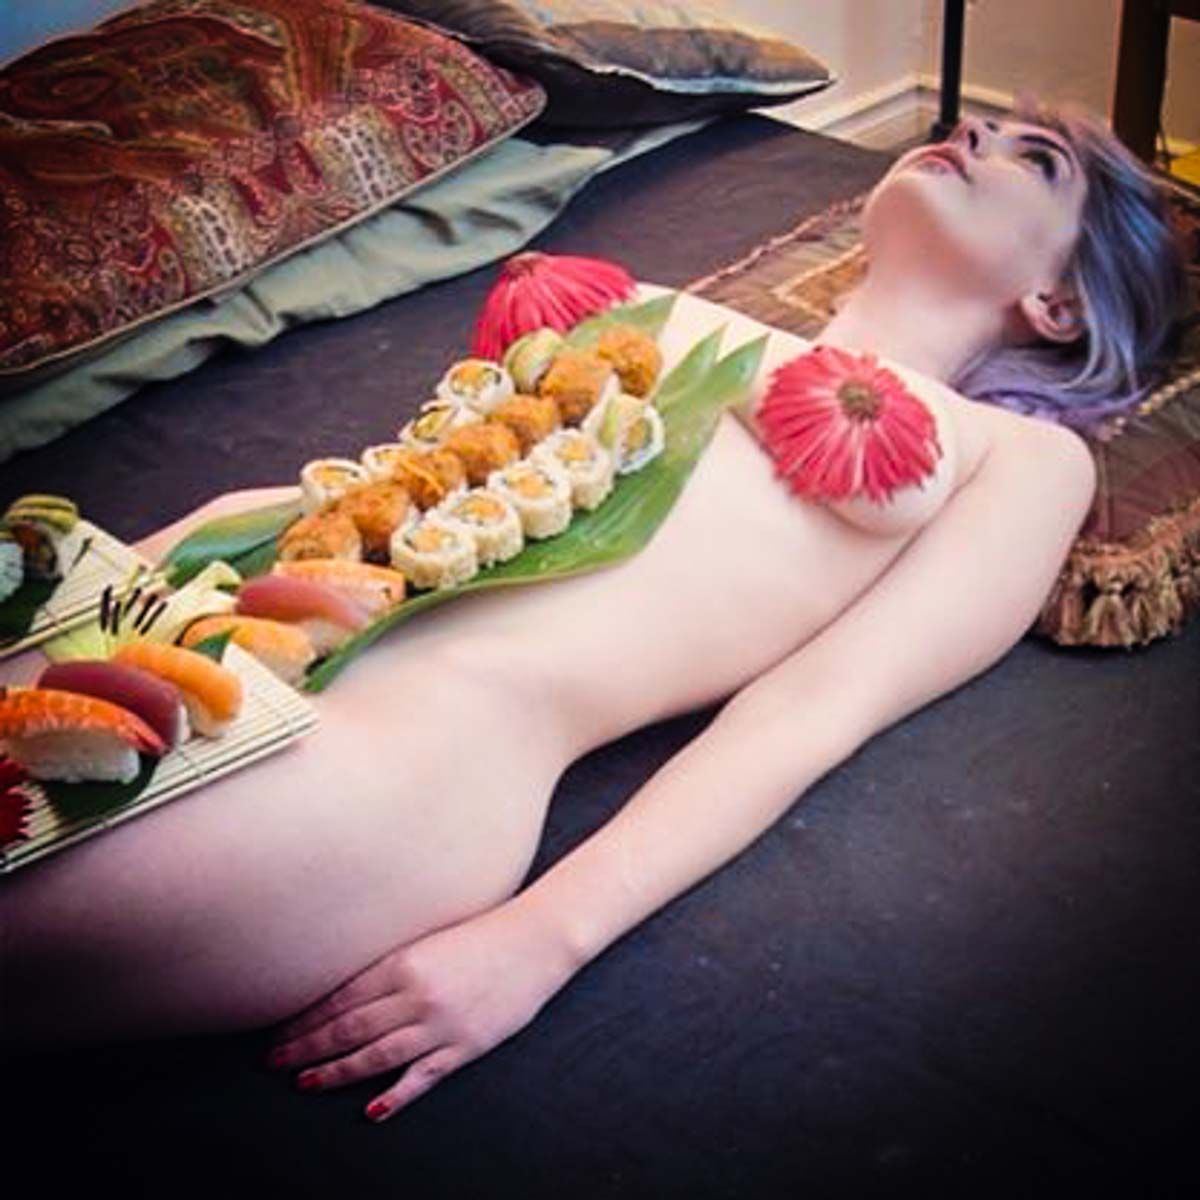 Monarch recommendet Naked girl with food on them on table